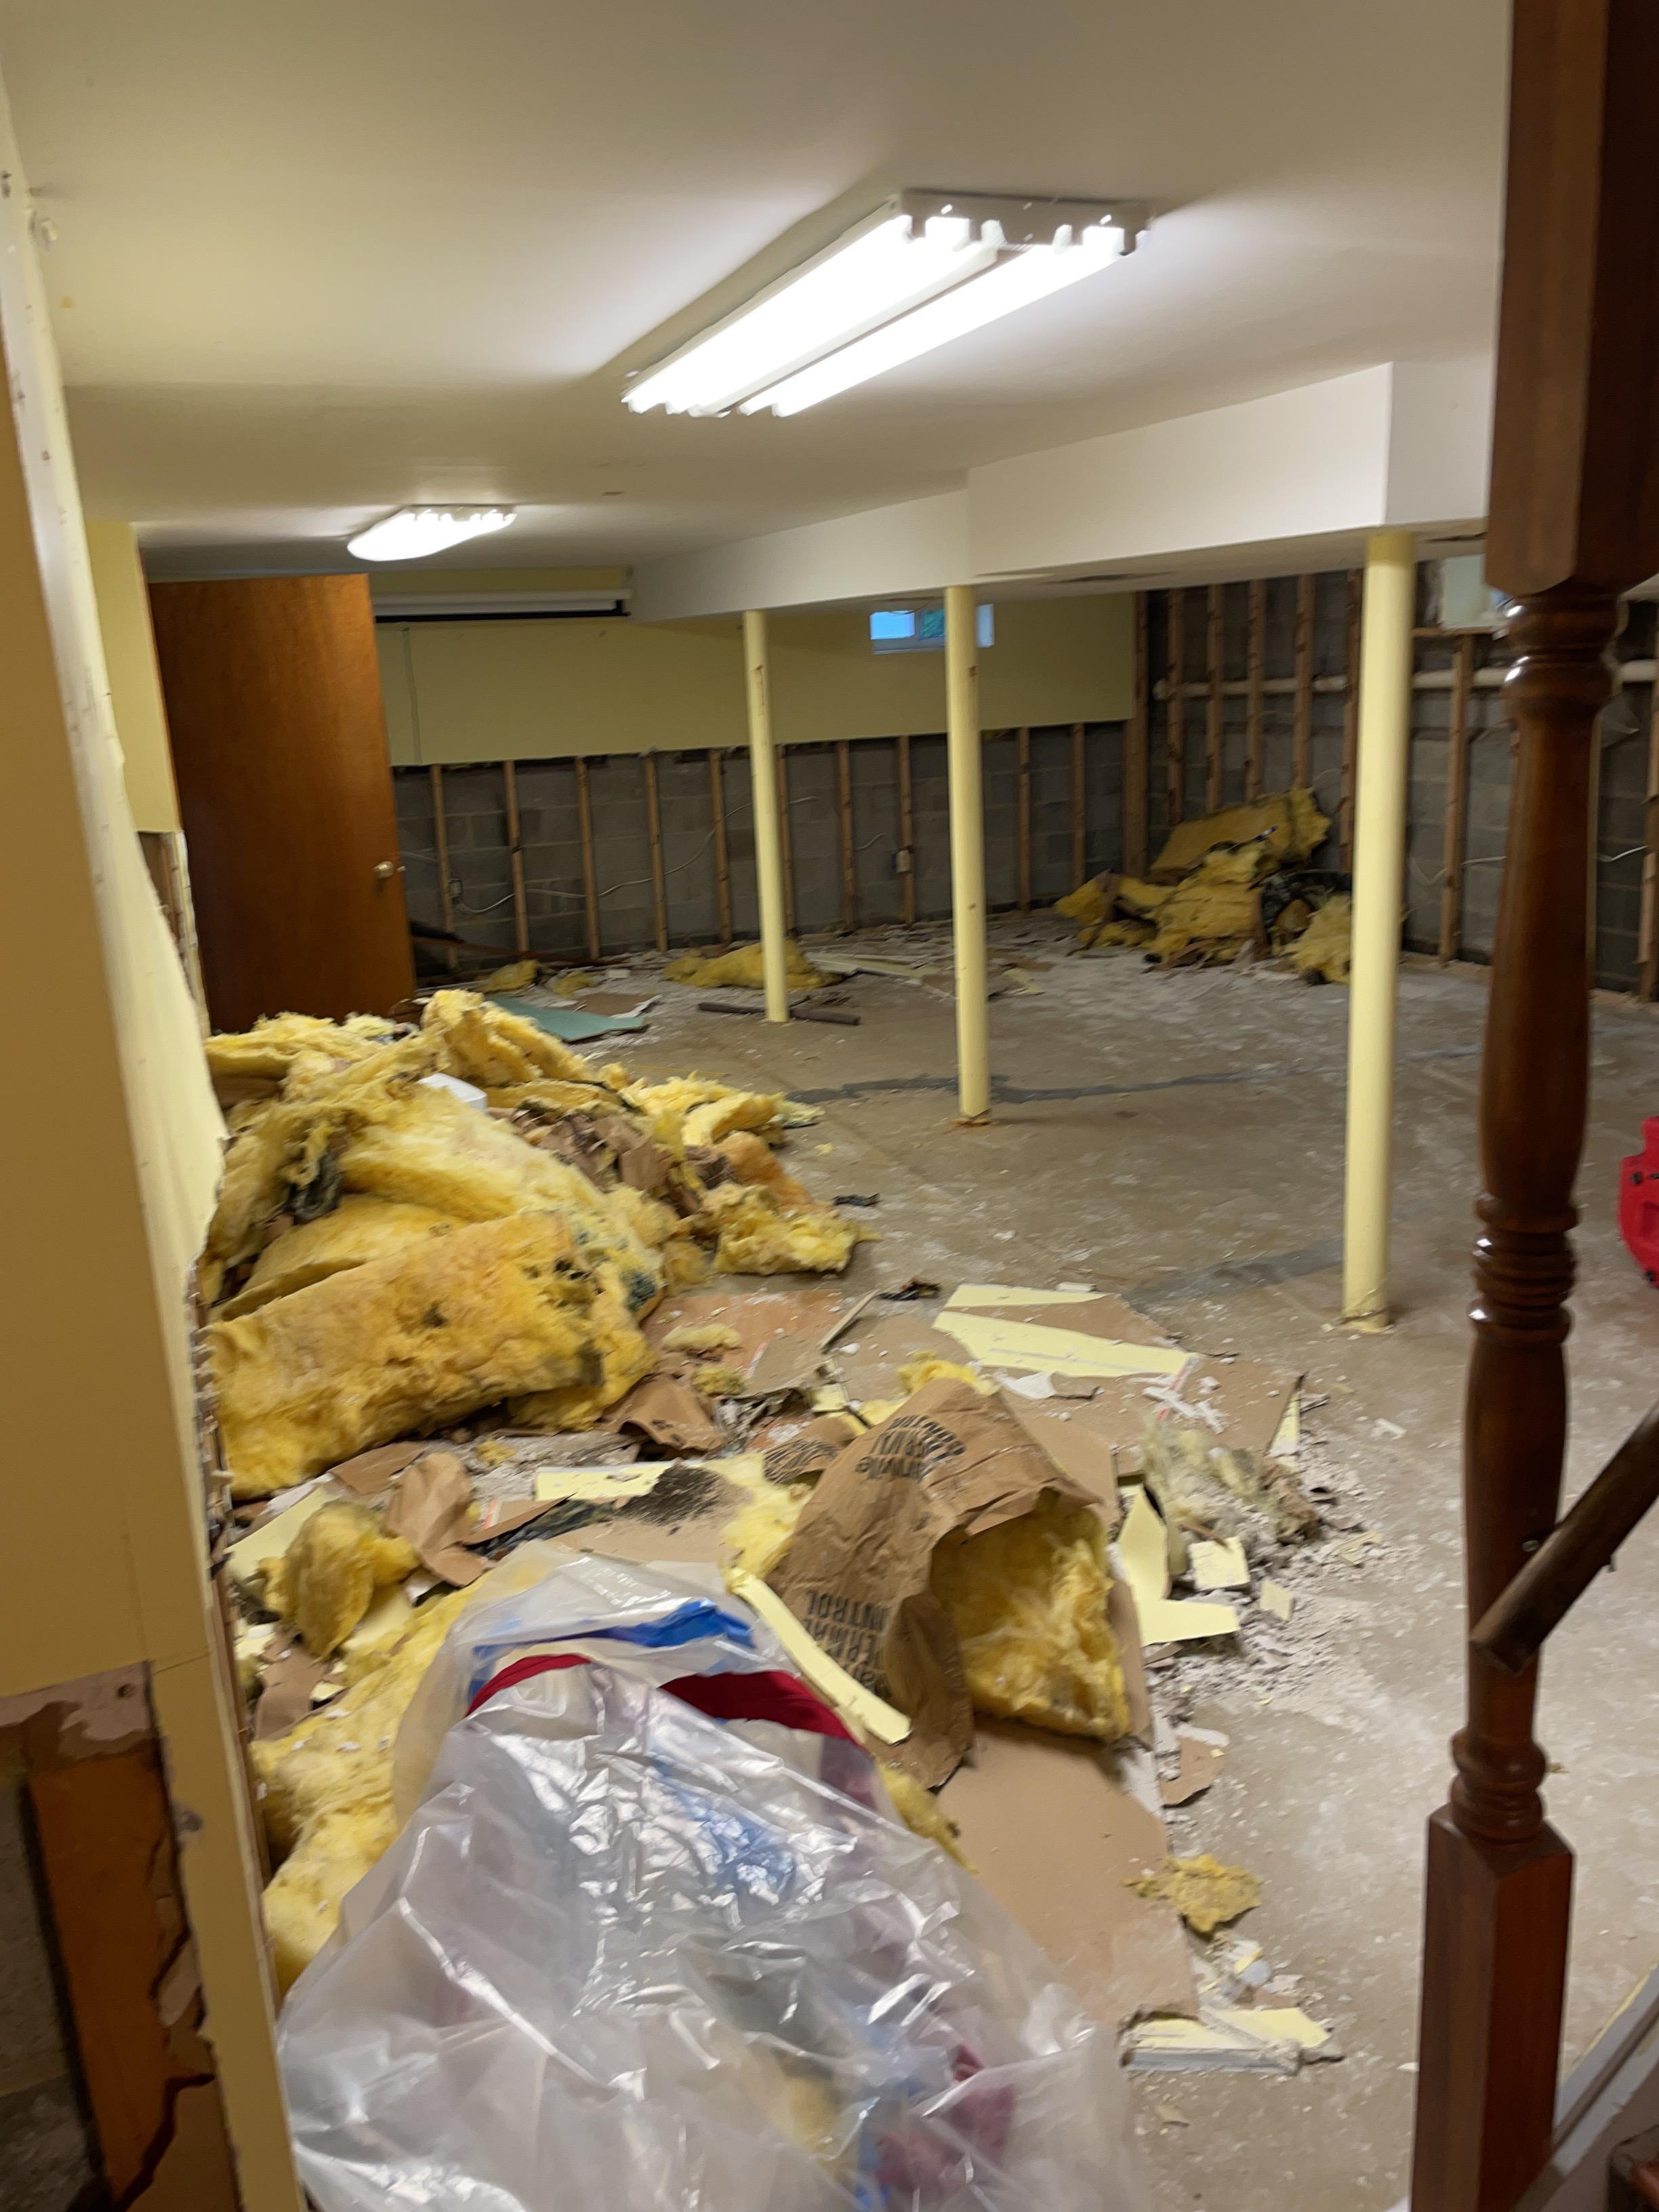 Removal of mold affected area